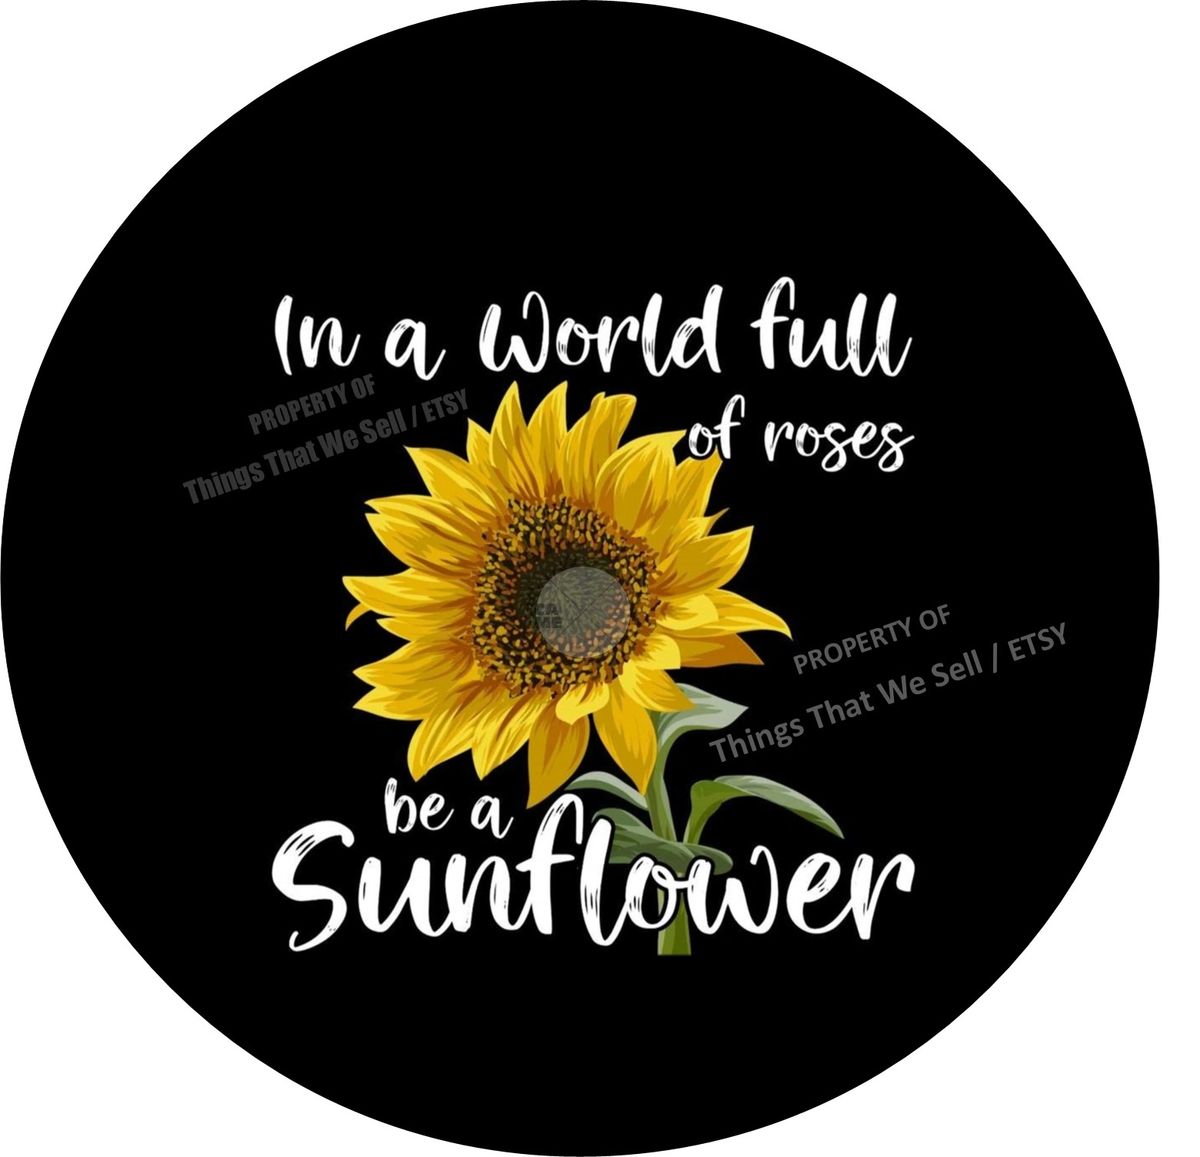 Sunflower Spare Tire Cover